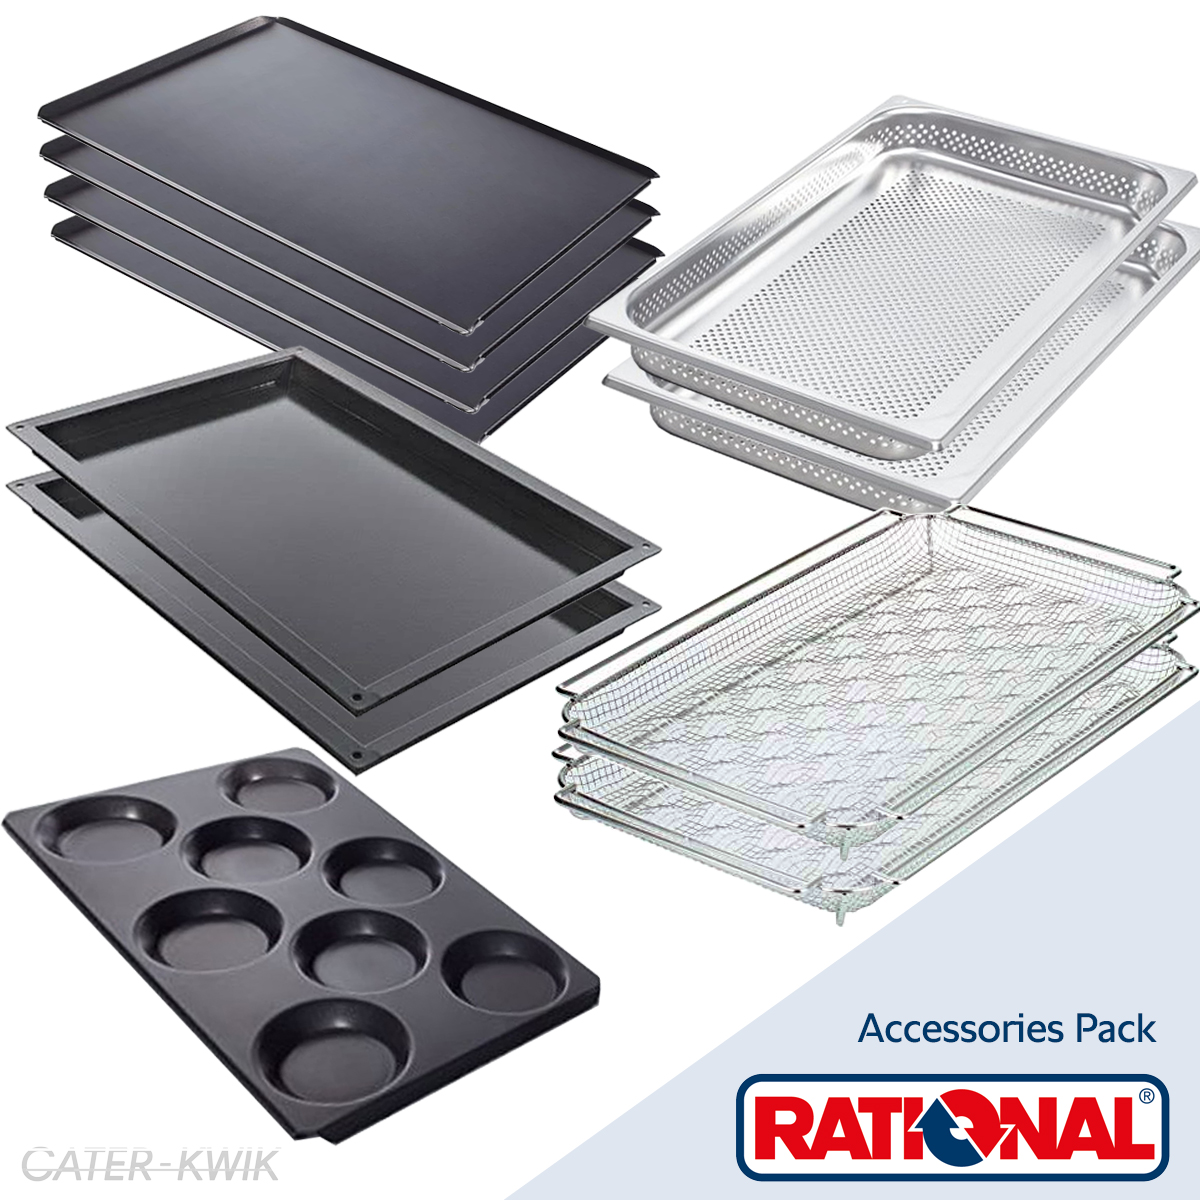 Rational Special Accessories Pack For 61, 101 & 62 Models - 60.75.445